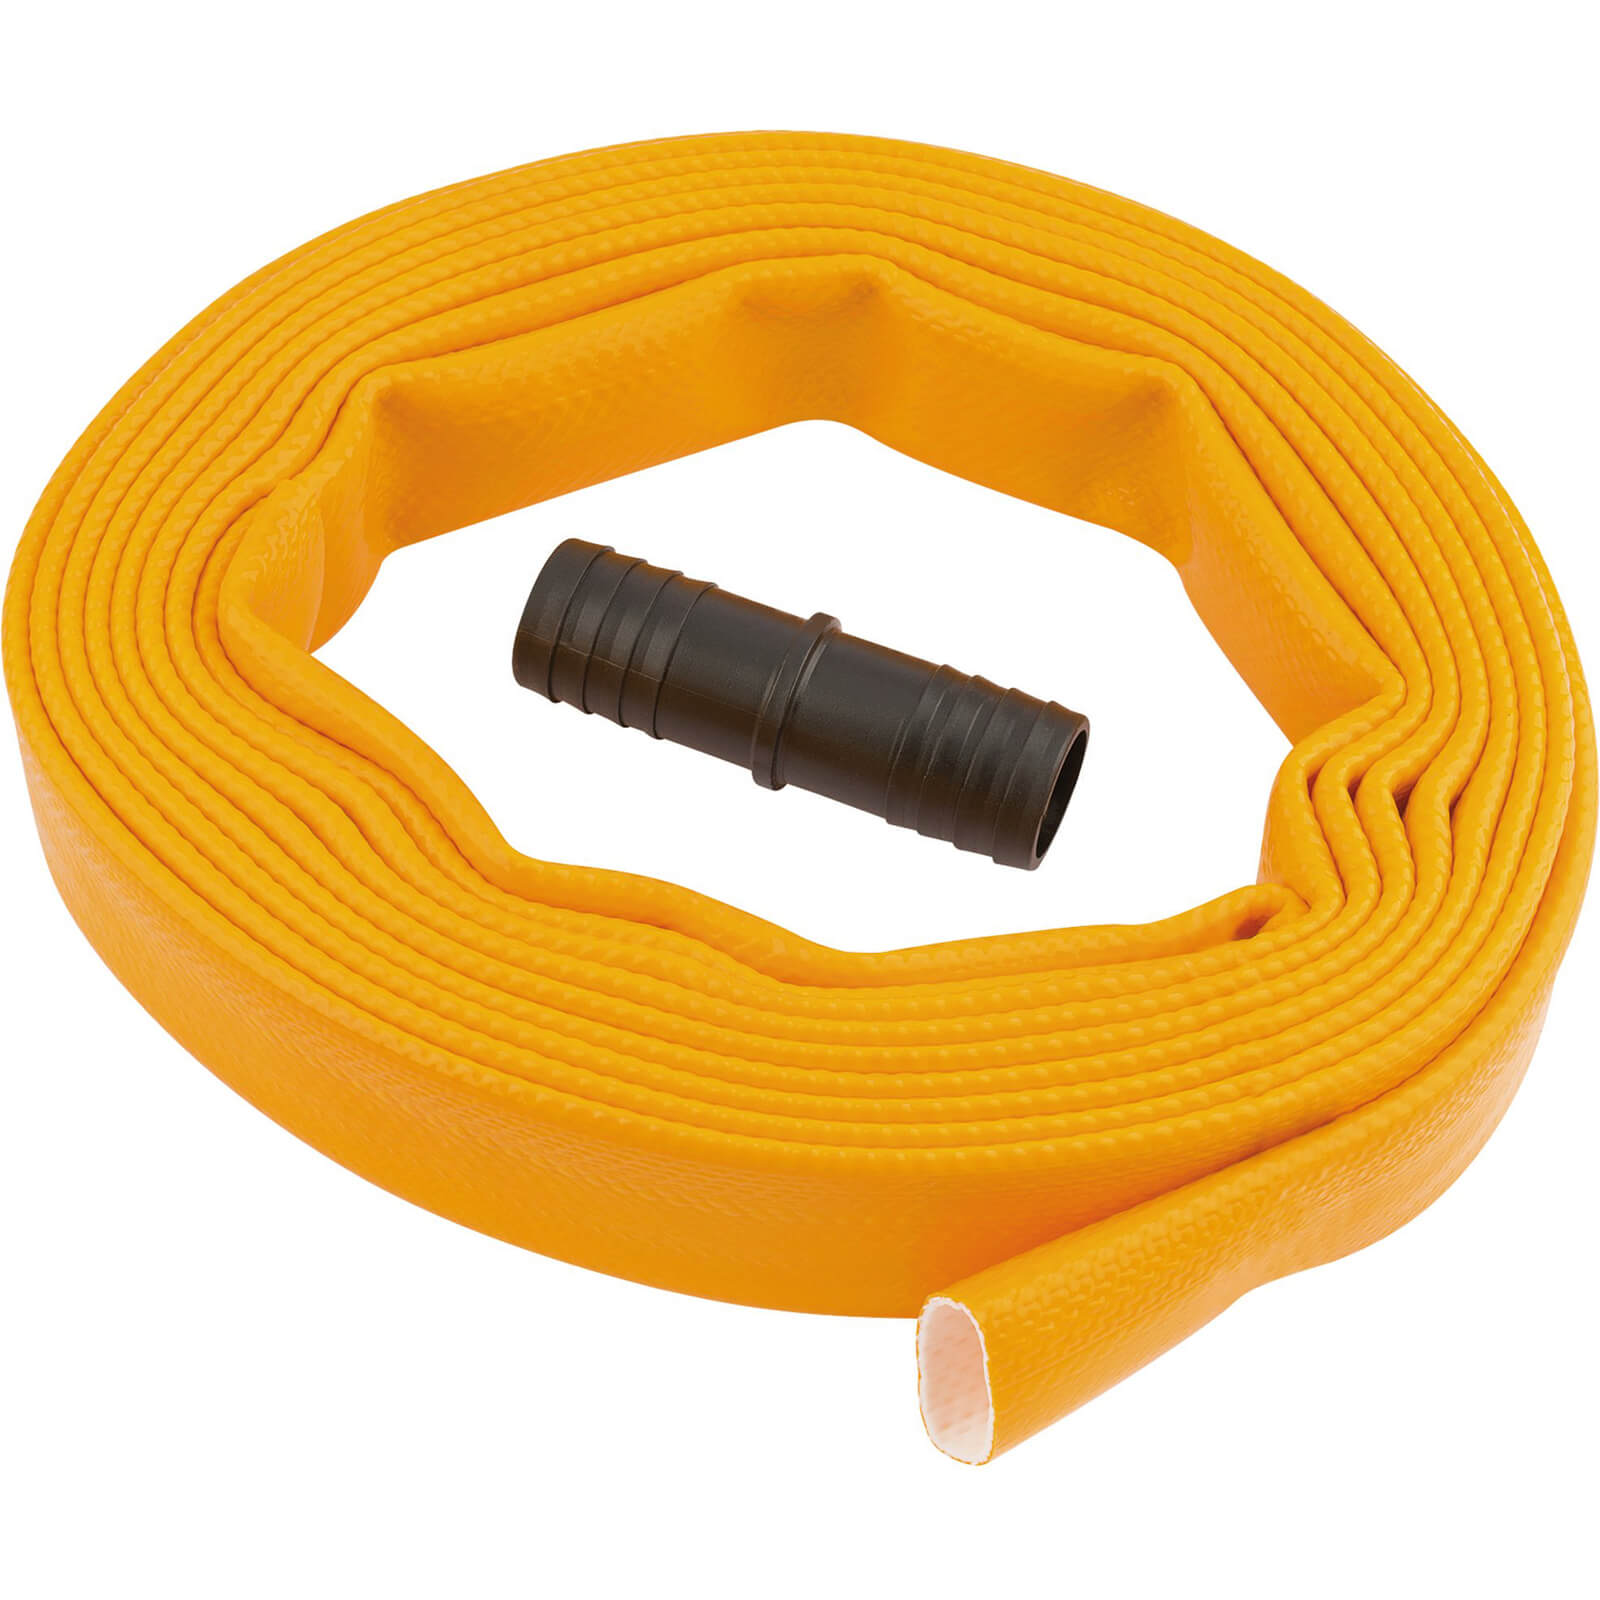 Photos - Other household chemicals Draper Lay Flat Hose and Connection Adaptor 25mm 5m 36990 